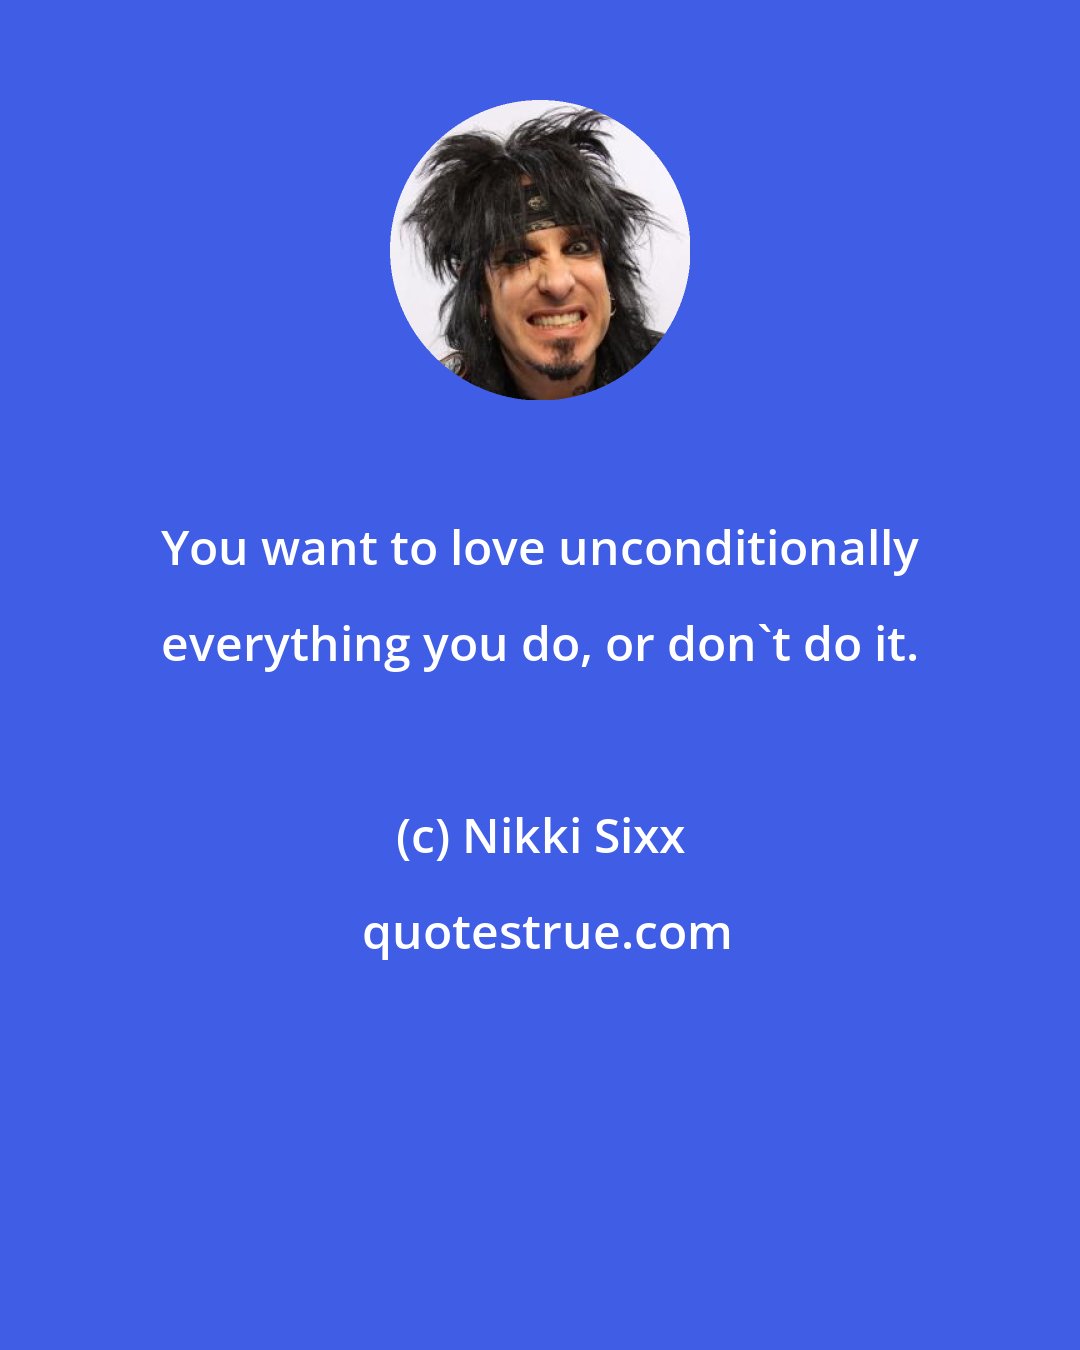 Nikki Sixx: You want to love unconditionally everything you do, or don't do it.